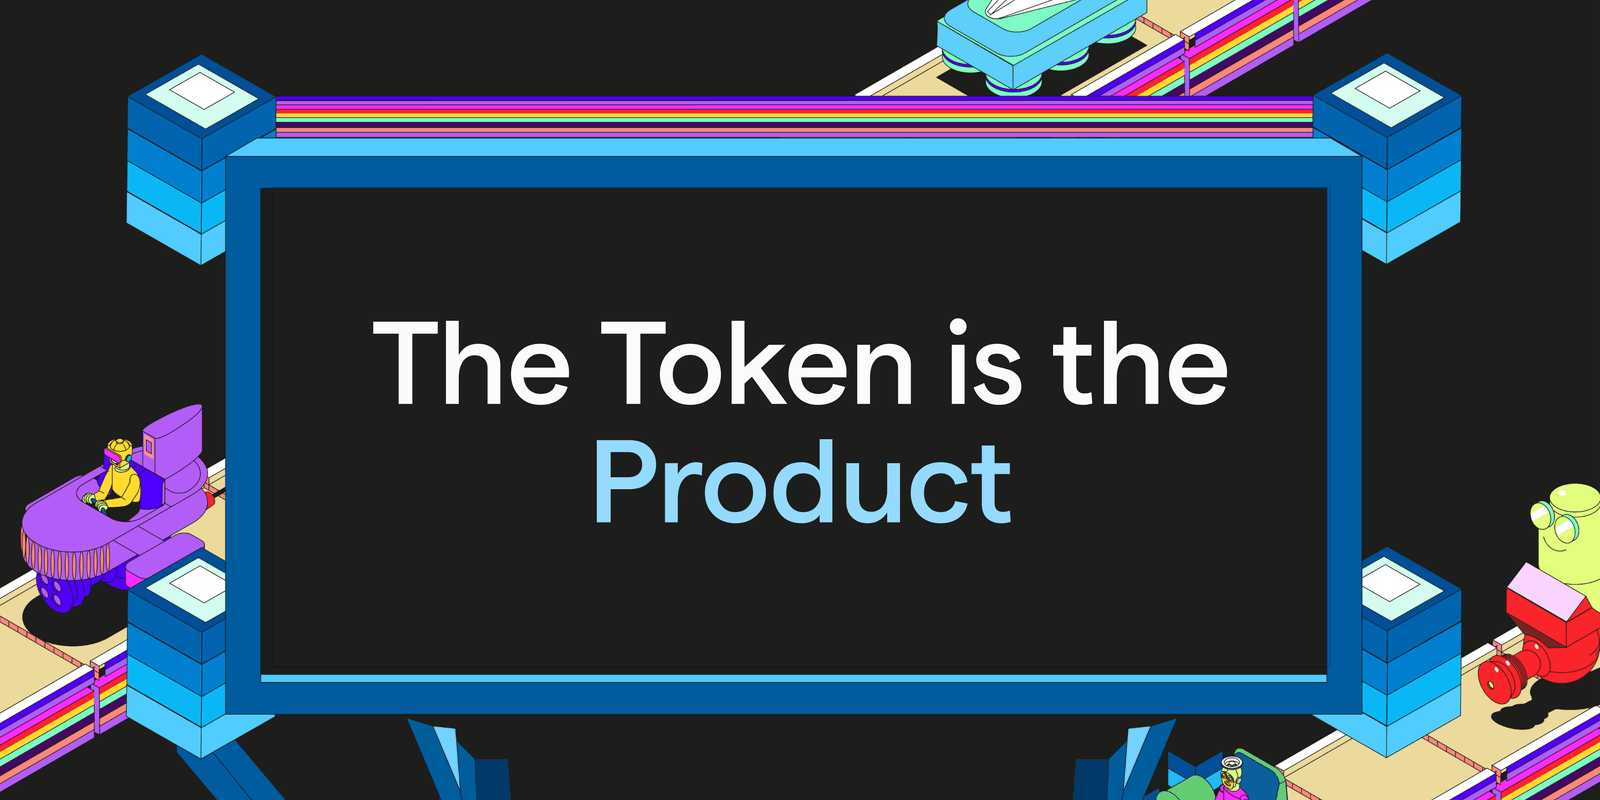 Through EigenLayer, Ethos leverages the use of Ethereum’s ETH as a means to provision improved security guarantees for independent Cosmos chains. Therefore, the ETH token and the underlying economic security it provides is the product that allows the entire Ethos ecosystem to thrive and function as required. (Image Credit: The Token is the Product via the Ethos blog)